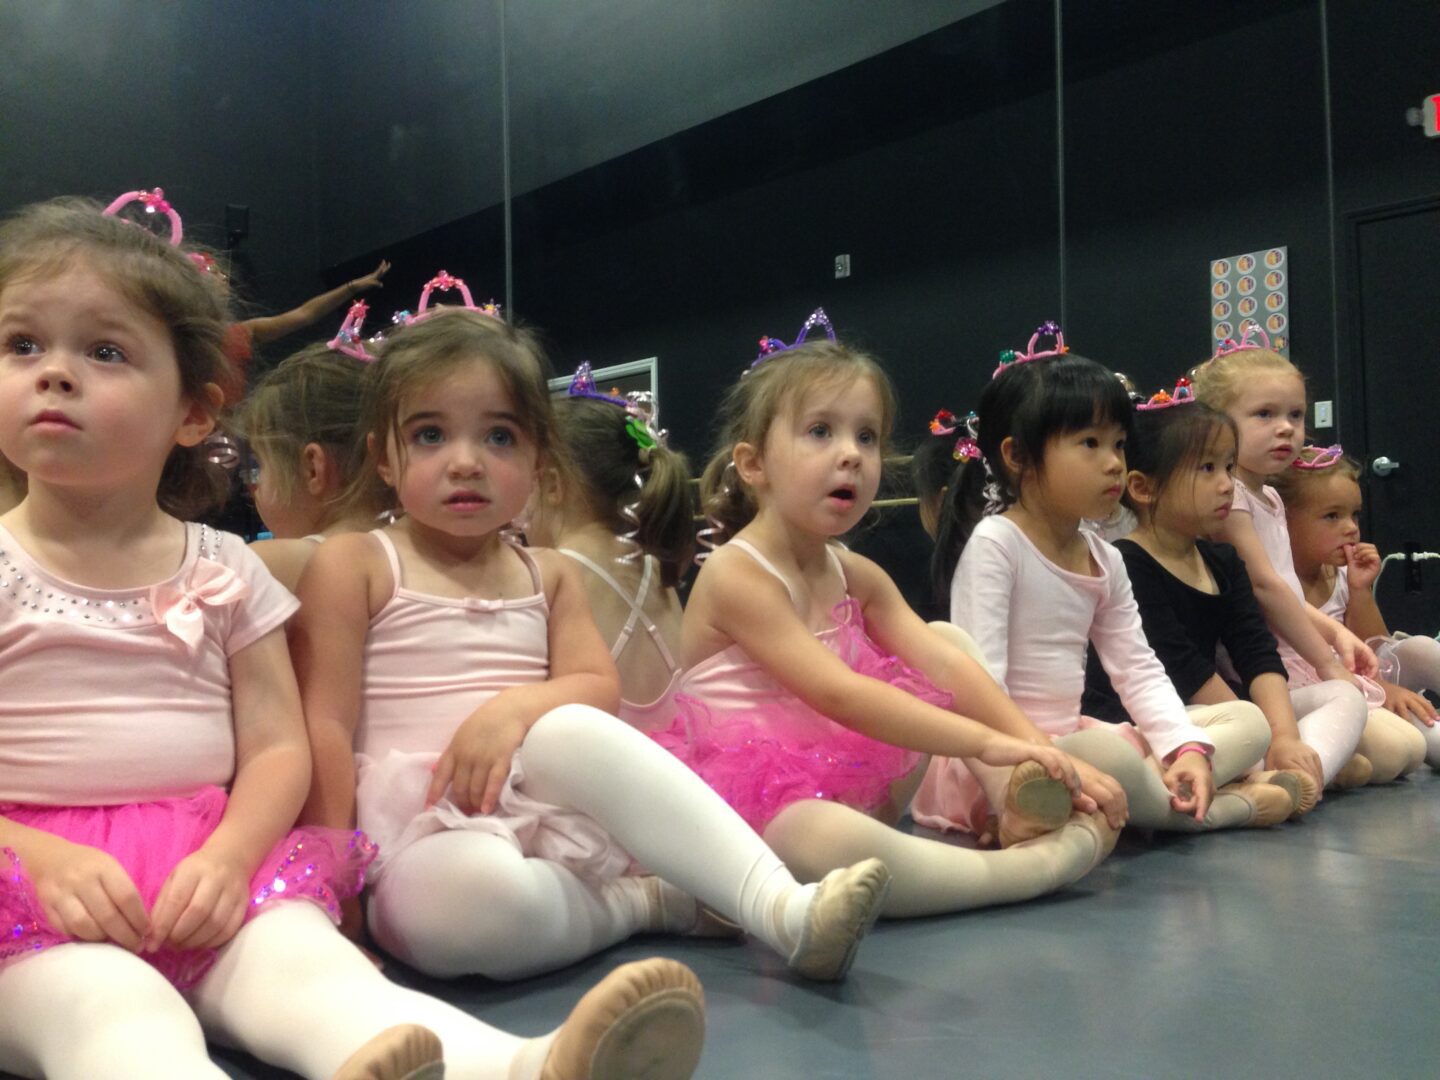 A group of young girls sitting in a ballet class.